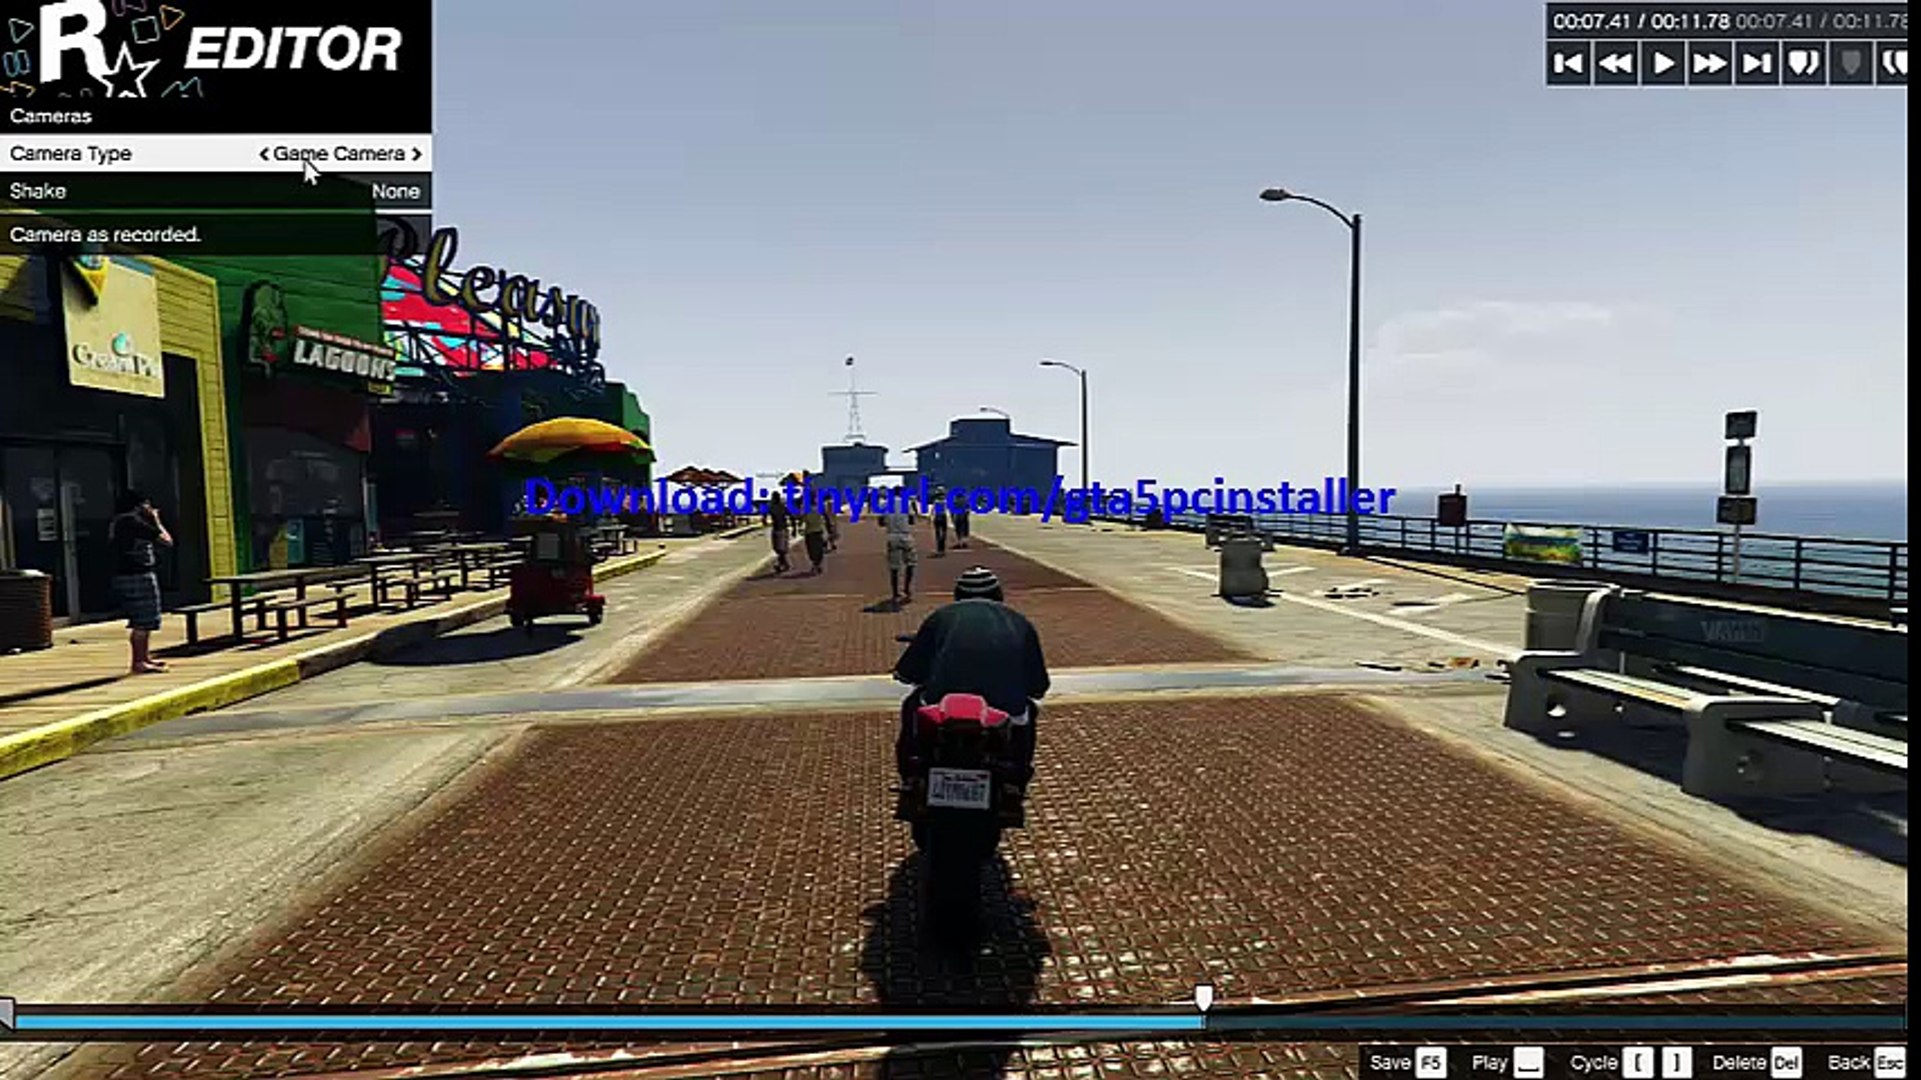 Grand Theft Auto 5 Full Game PC and Install